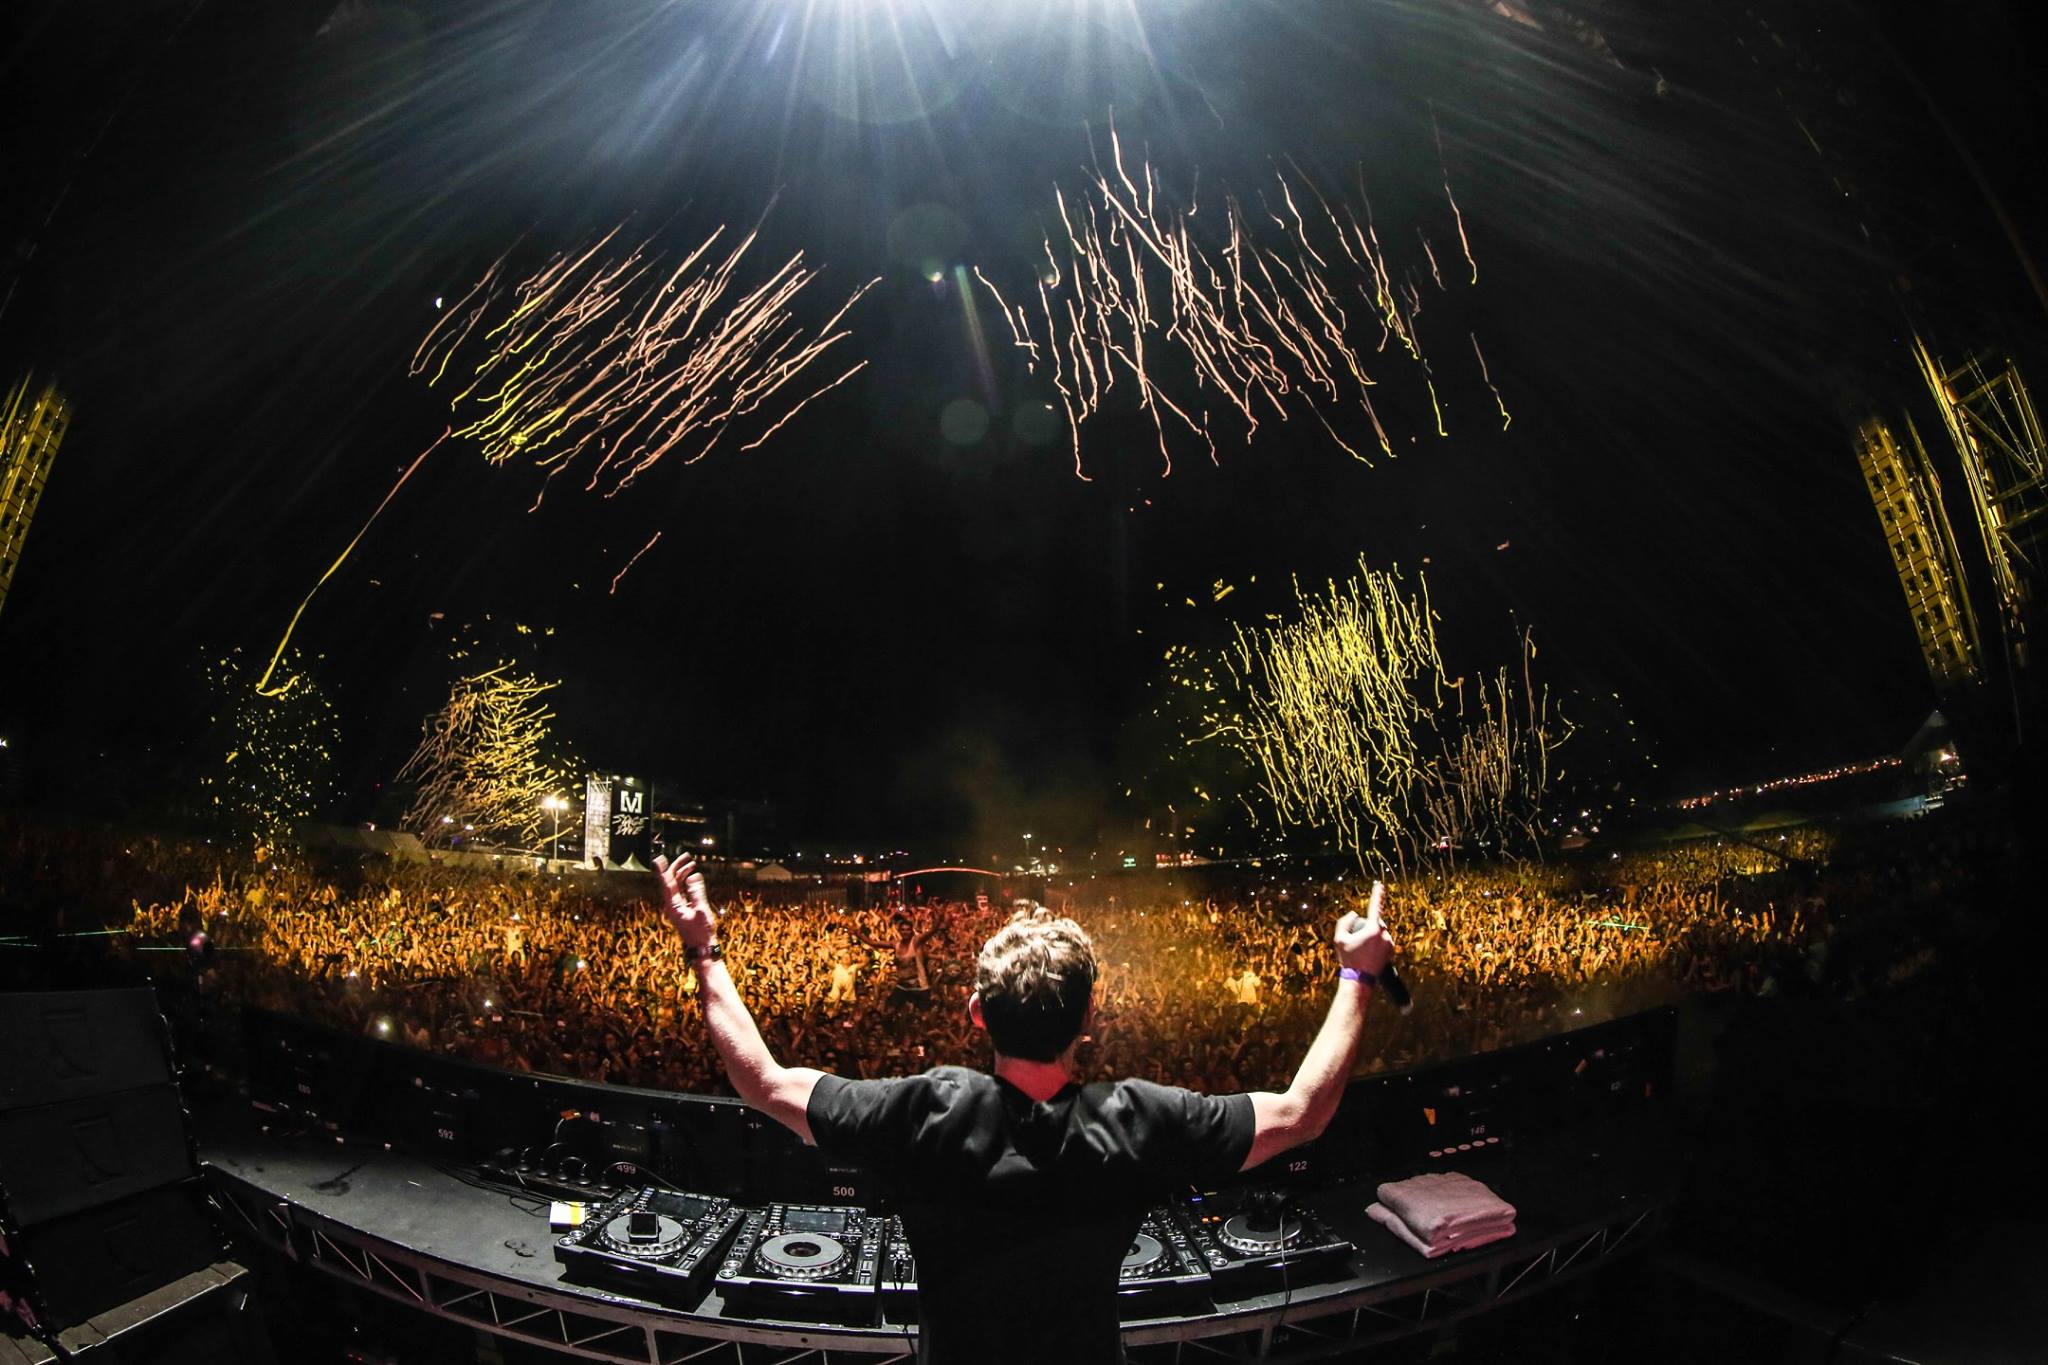 Hardwell Wallpaper Pictures Image